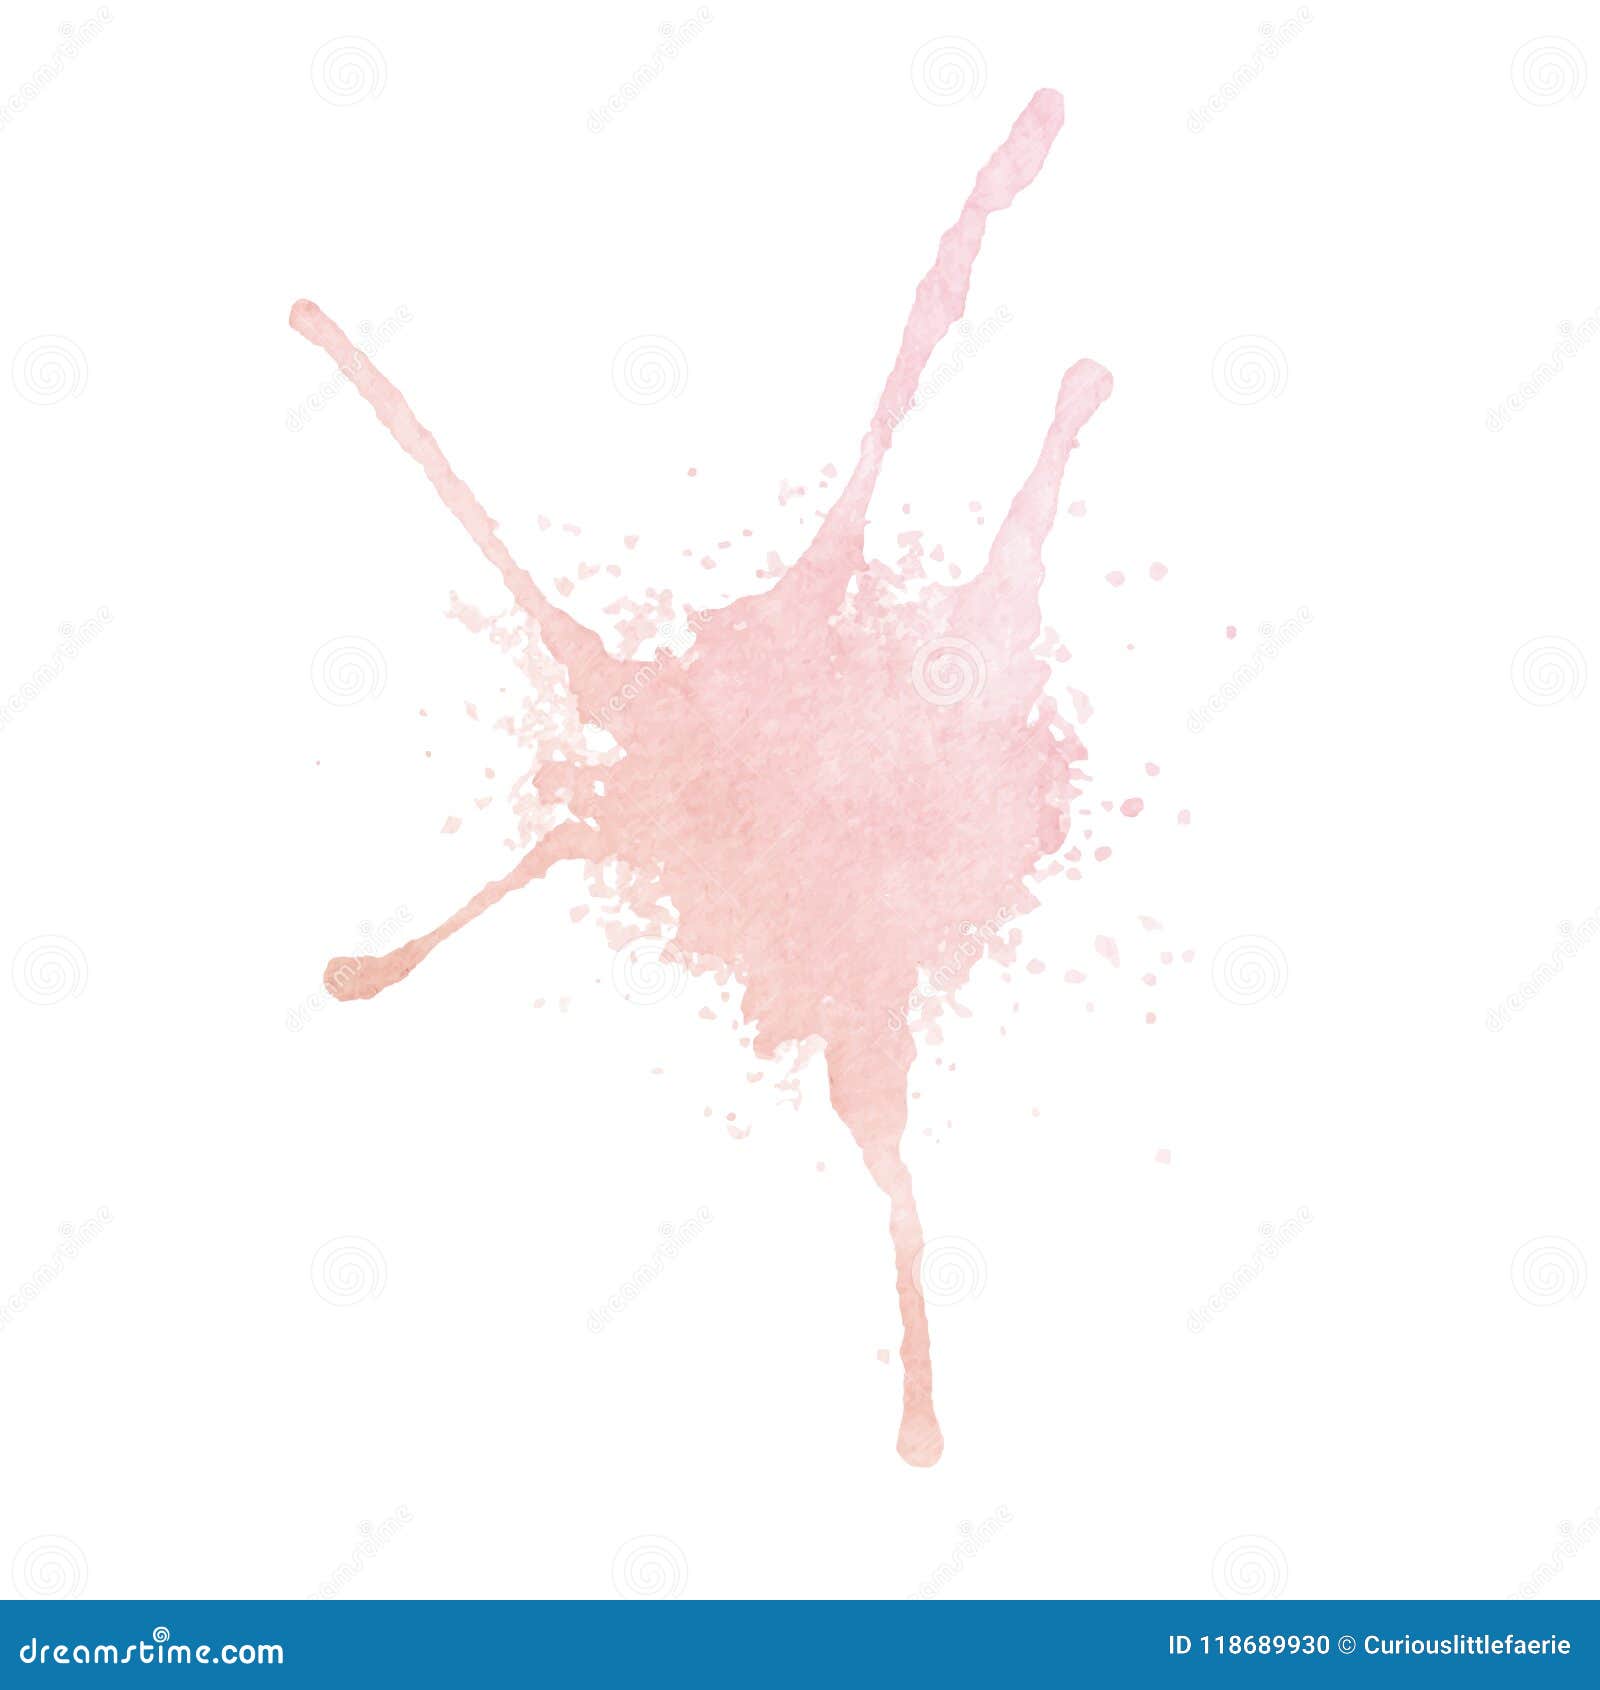 Hand Painted Watercolor Pink Blot Texture Isolated on the White Stock ...